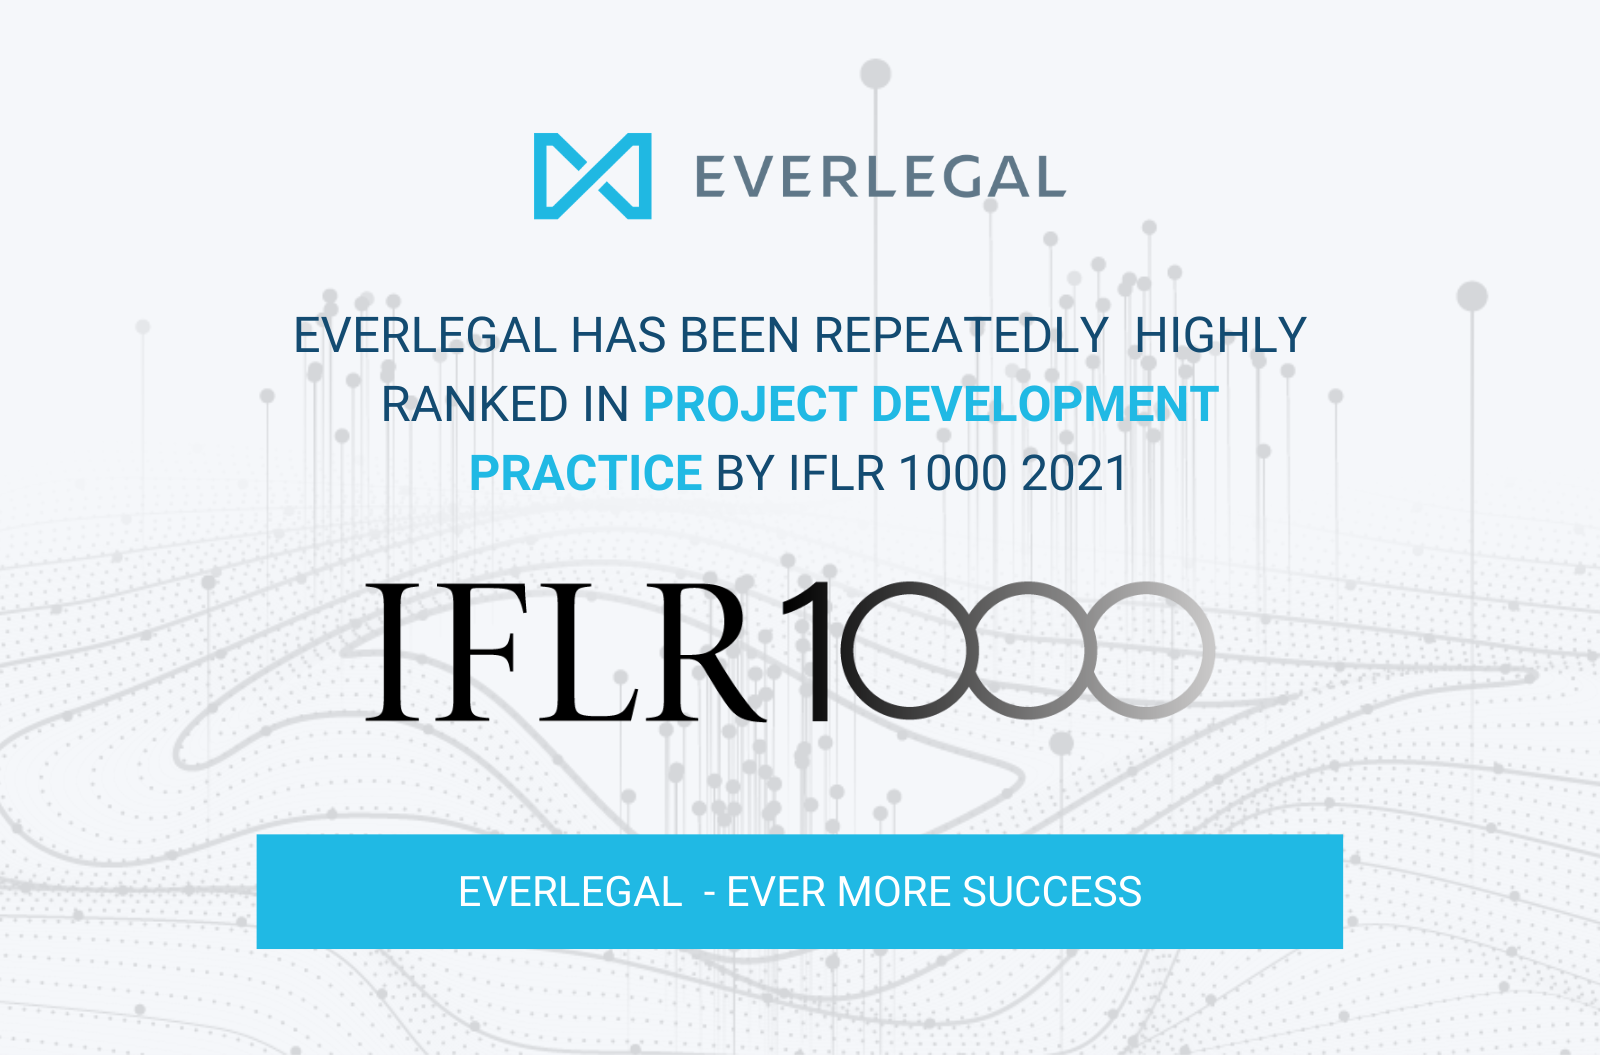 EVERLEGAL has been repeatedly highly ranked in the Project Development practice by the IFLR 1000 2021